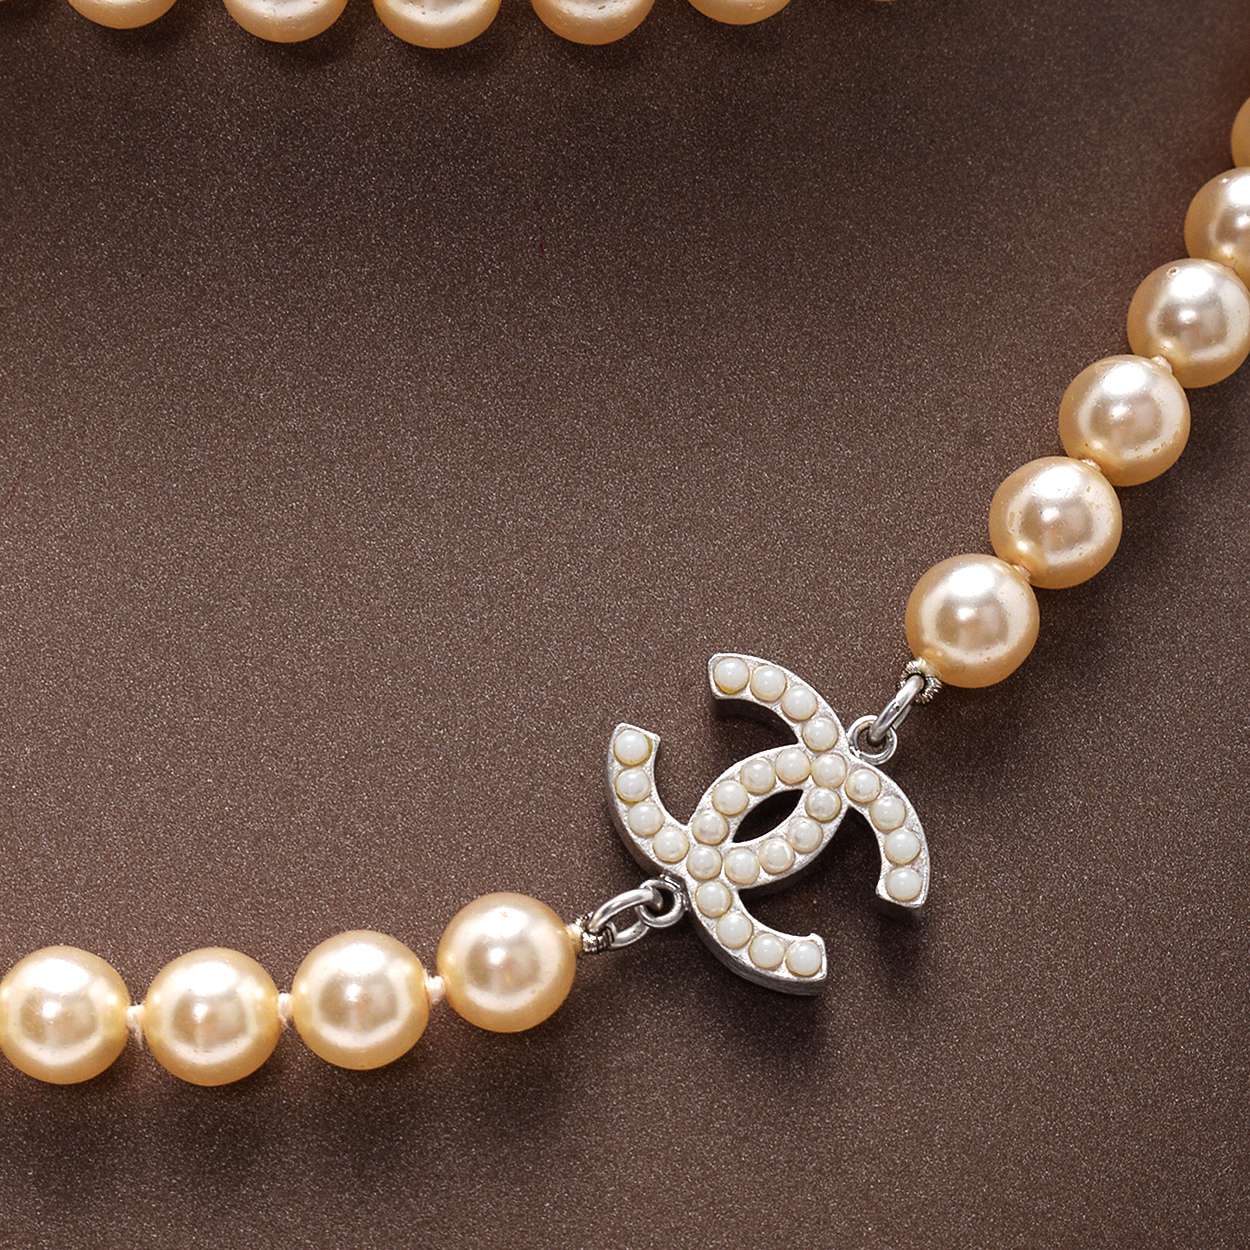 Chanel - Cream Pearl 3 CC Extra Long Necklace